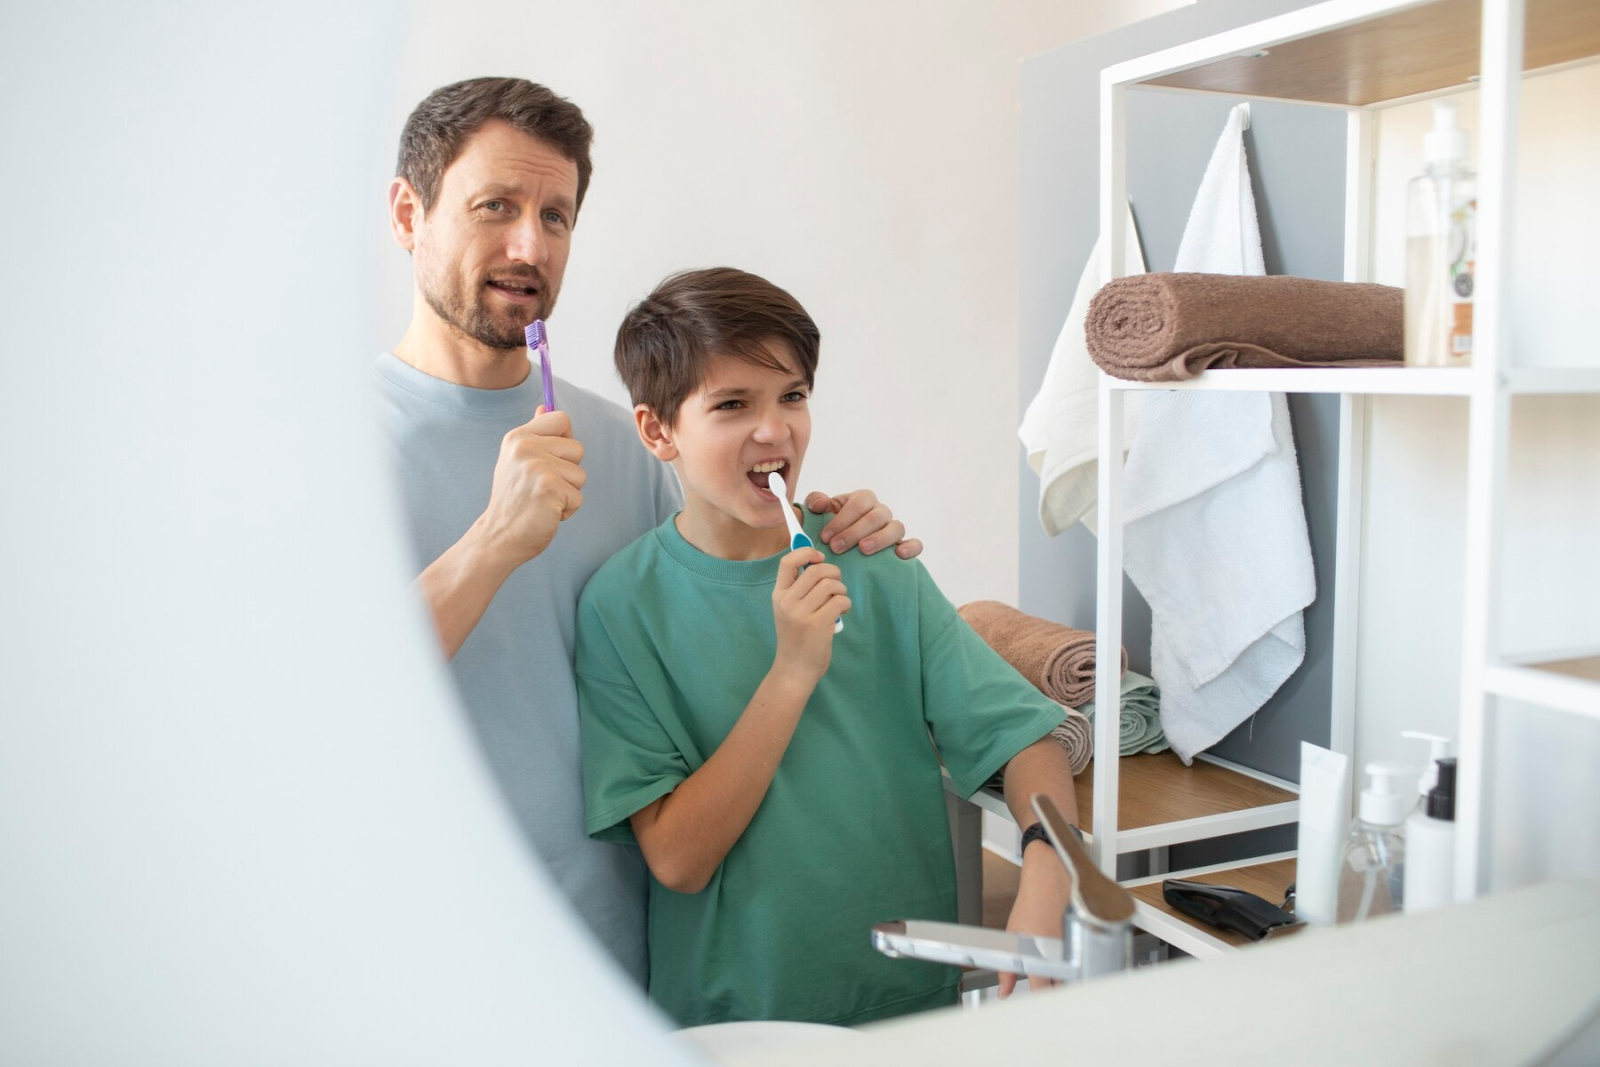 How to Avoid Tooth Decay